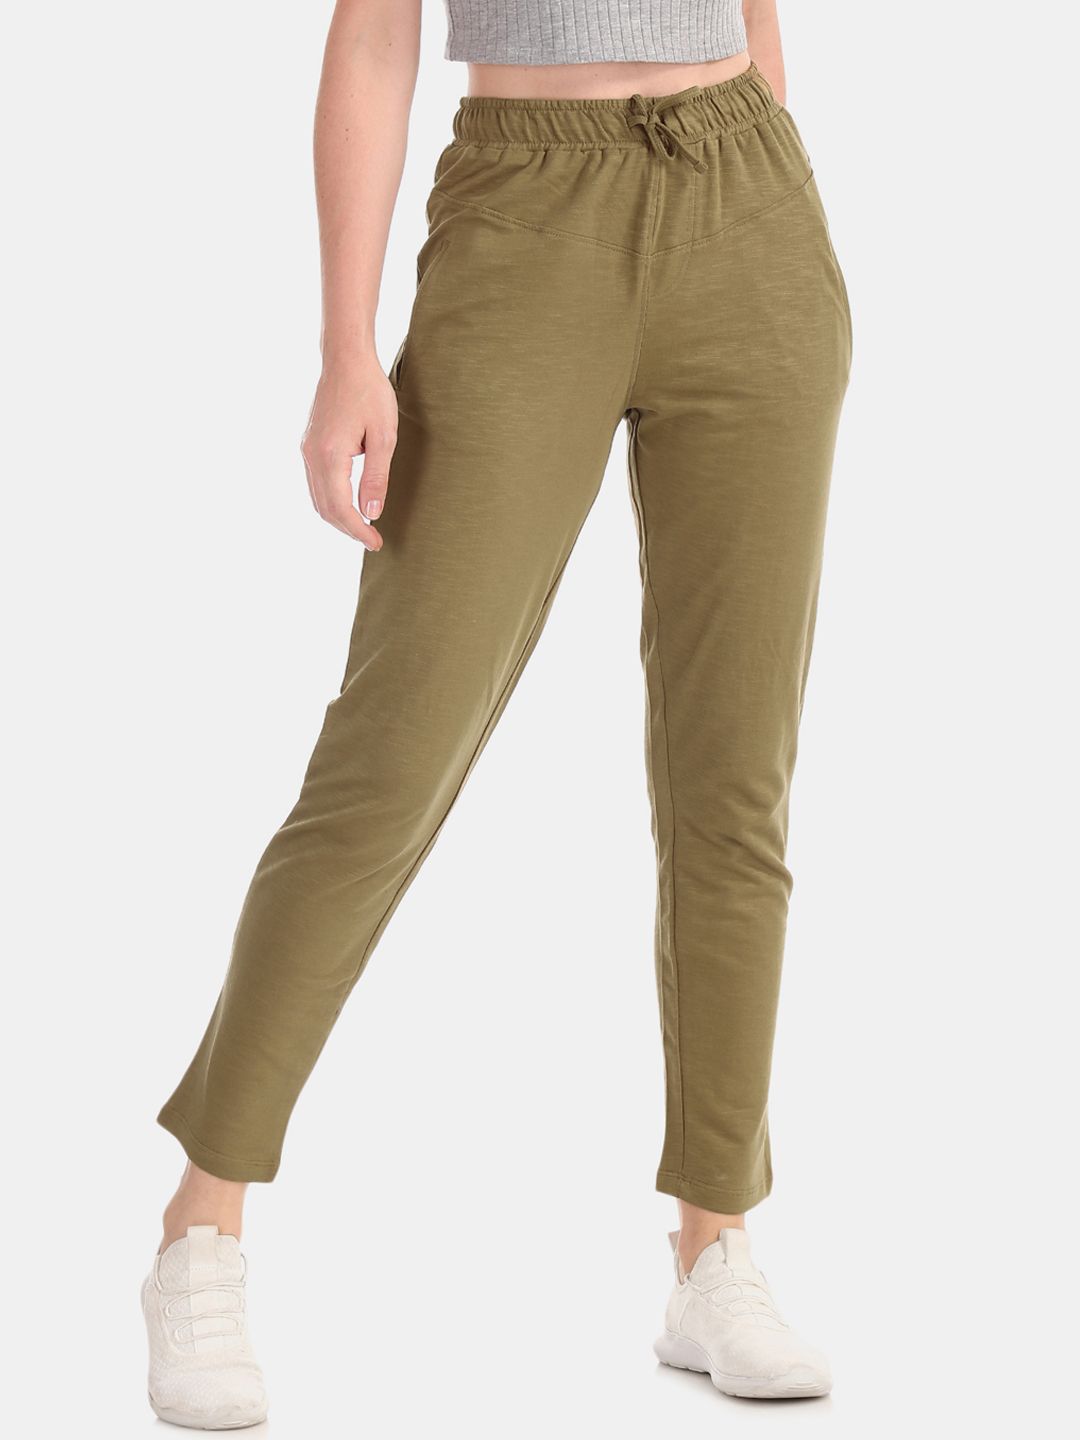 Sugr Women Olive Green Solid Trackpants Price in India